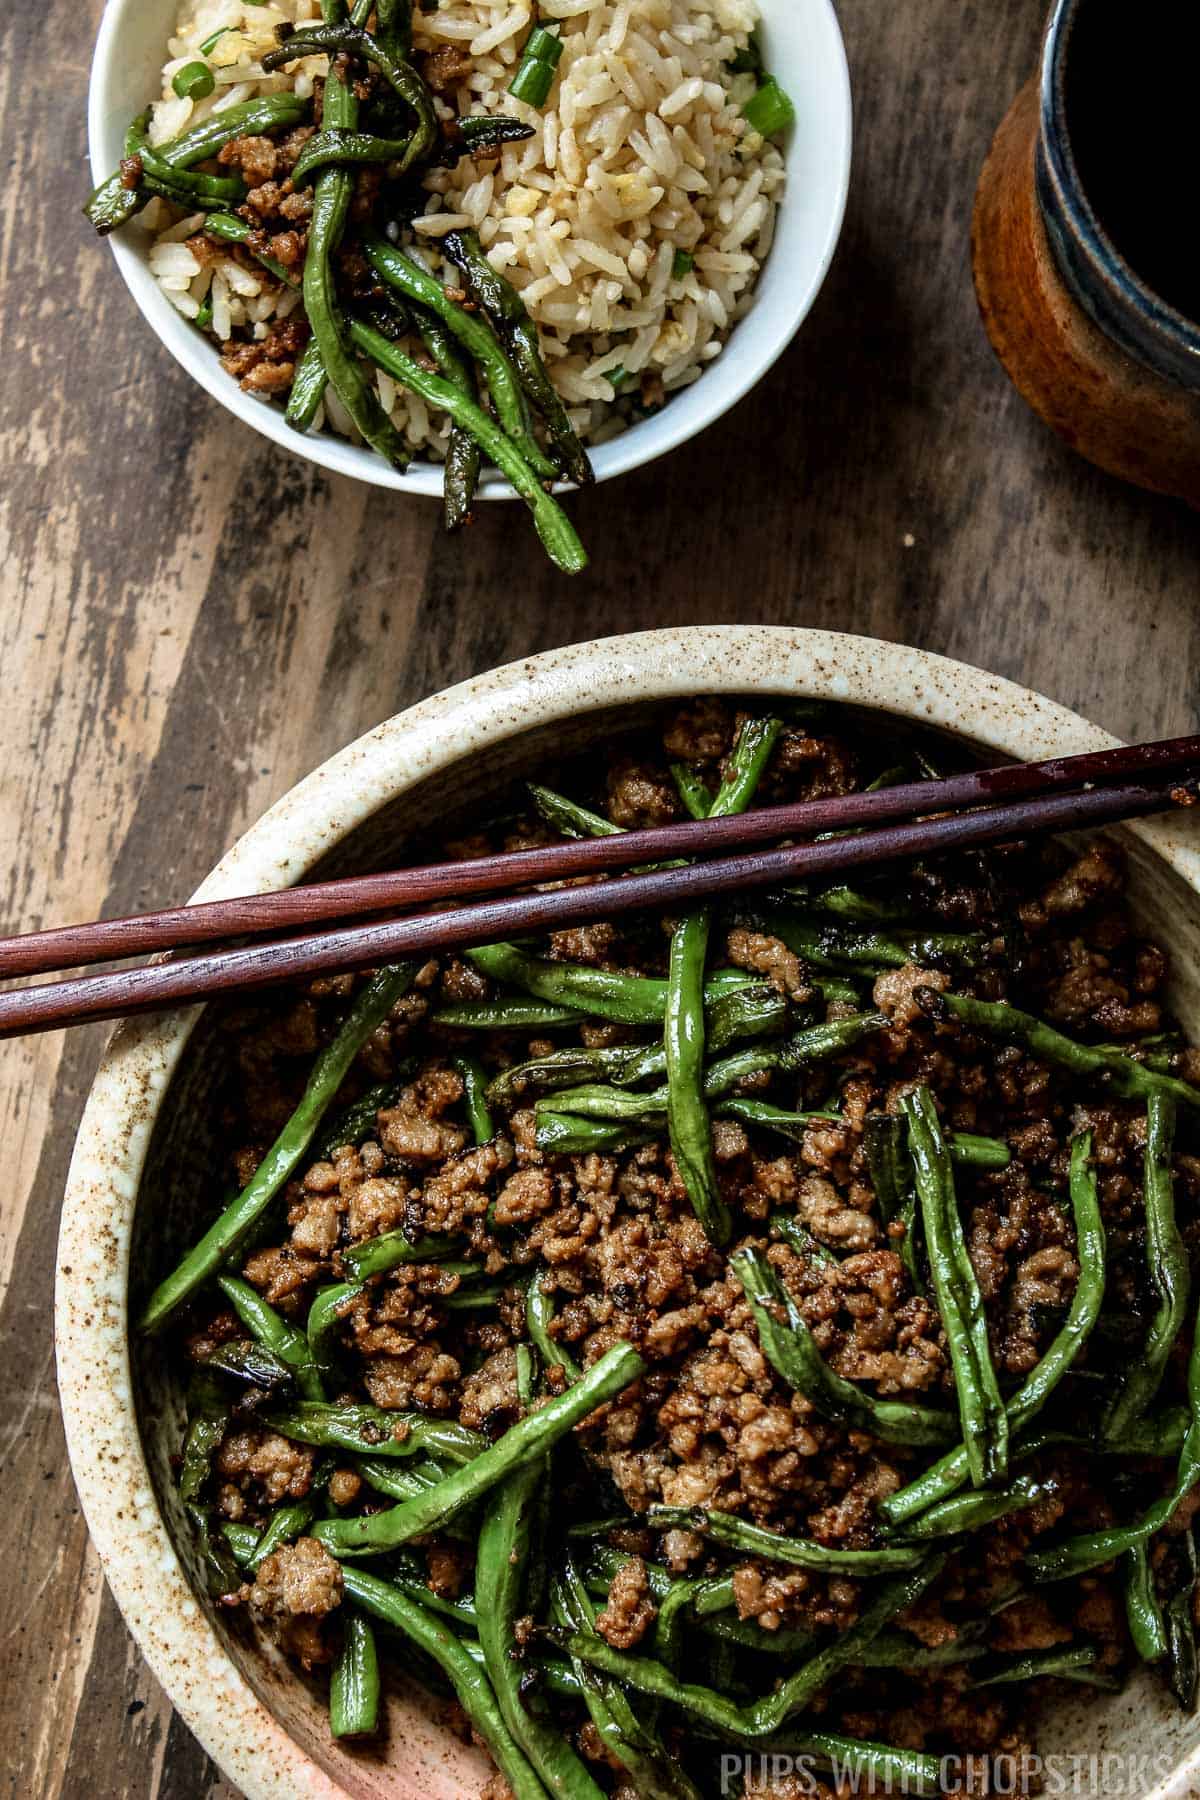 Dry-Fried Long Beans and Minced Pork with Olive Vegetables served with white rice.